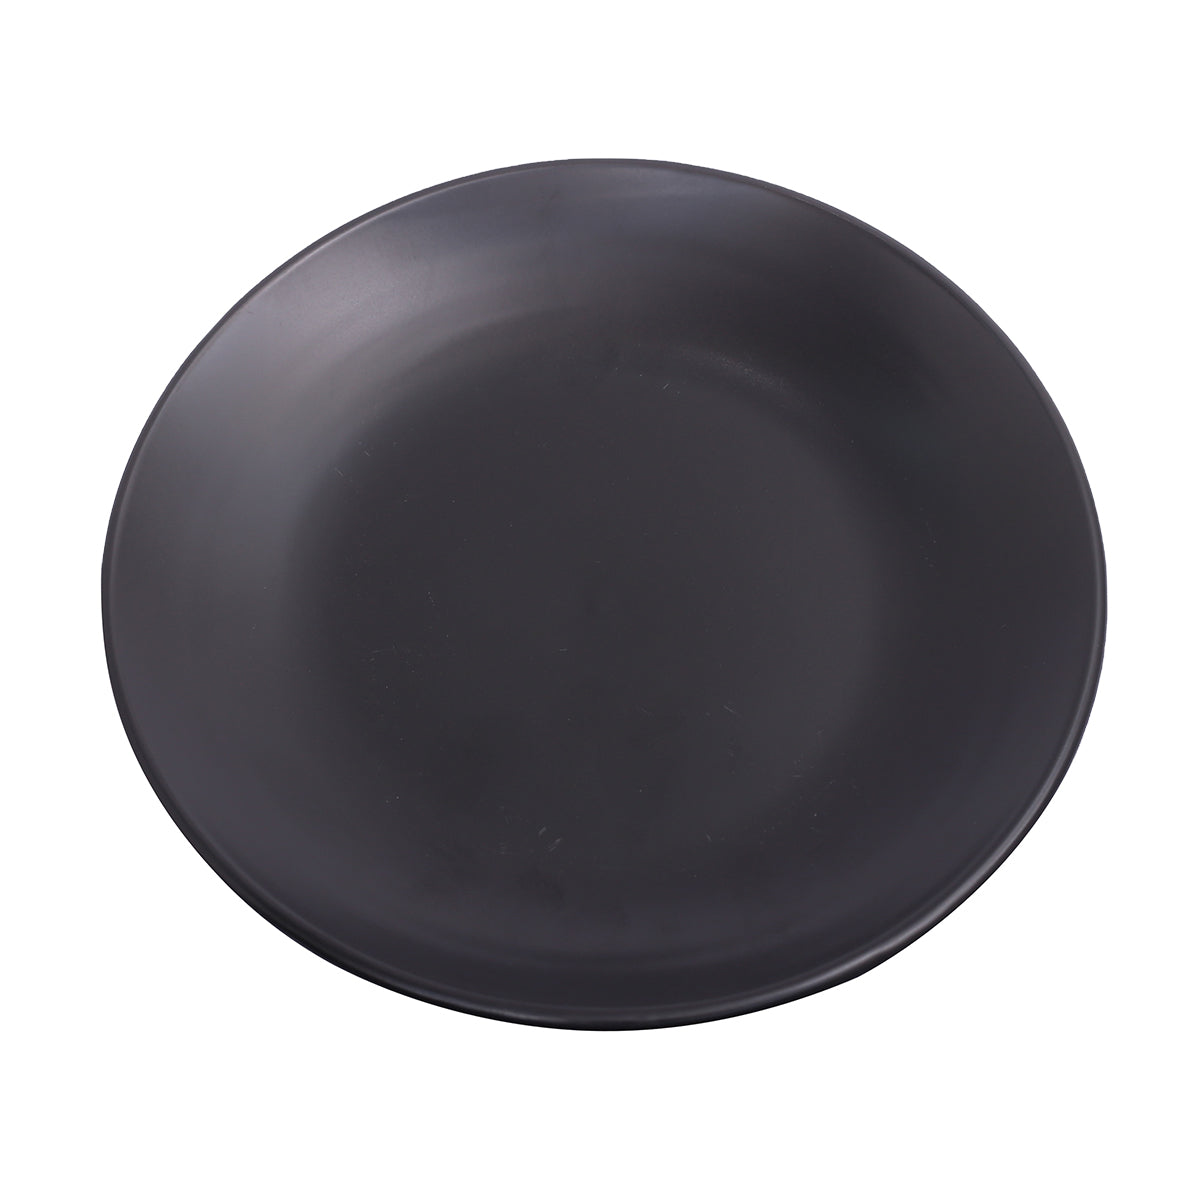 Rice Plate Black 8 Inch 14499-9